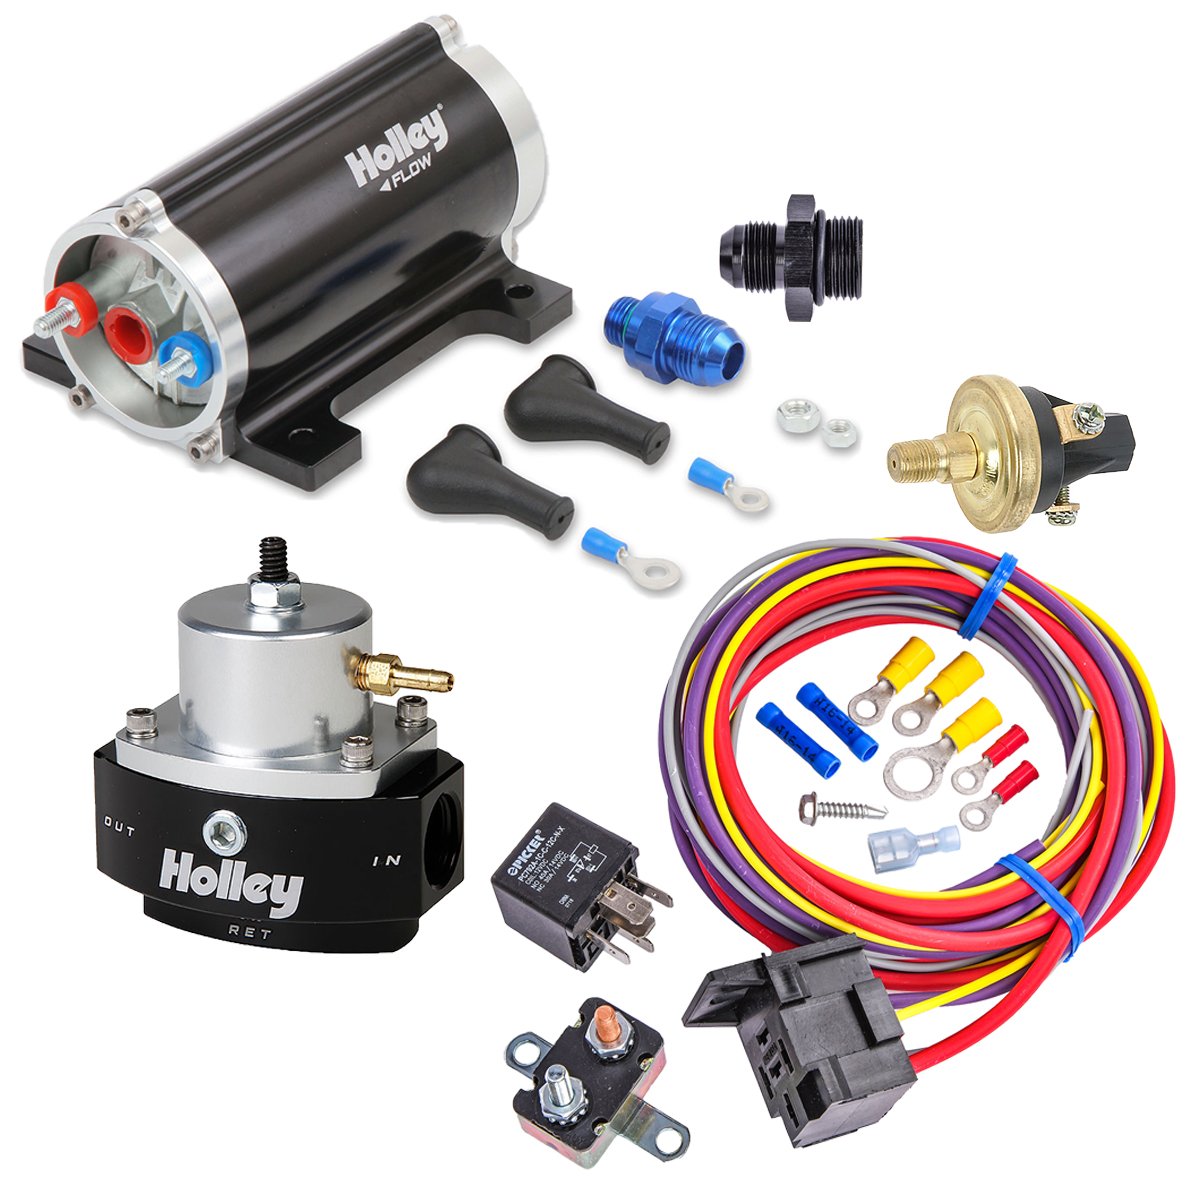 Universal In-Line Electric Fuel Pump Kit with Regulator